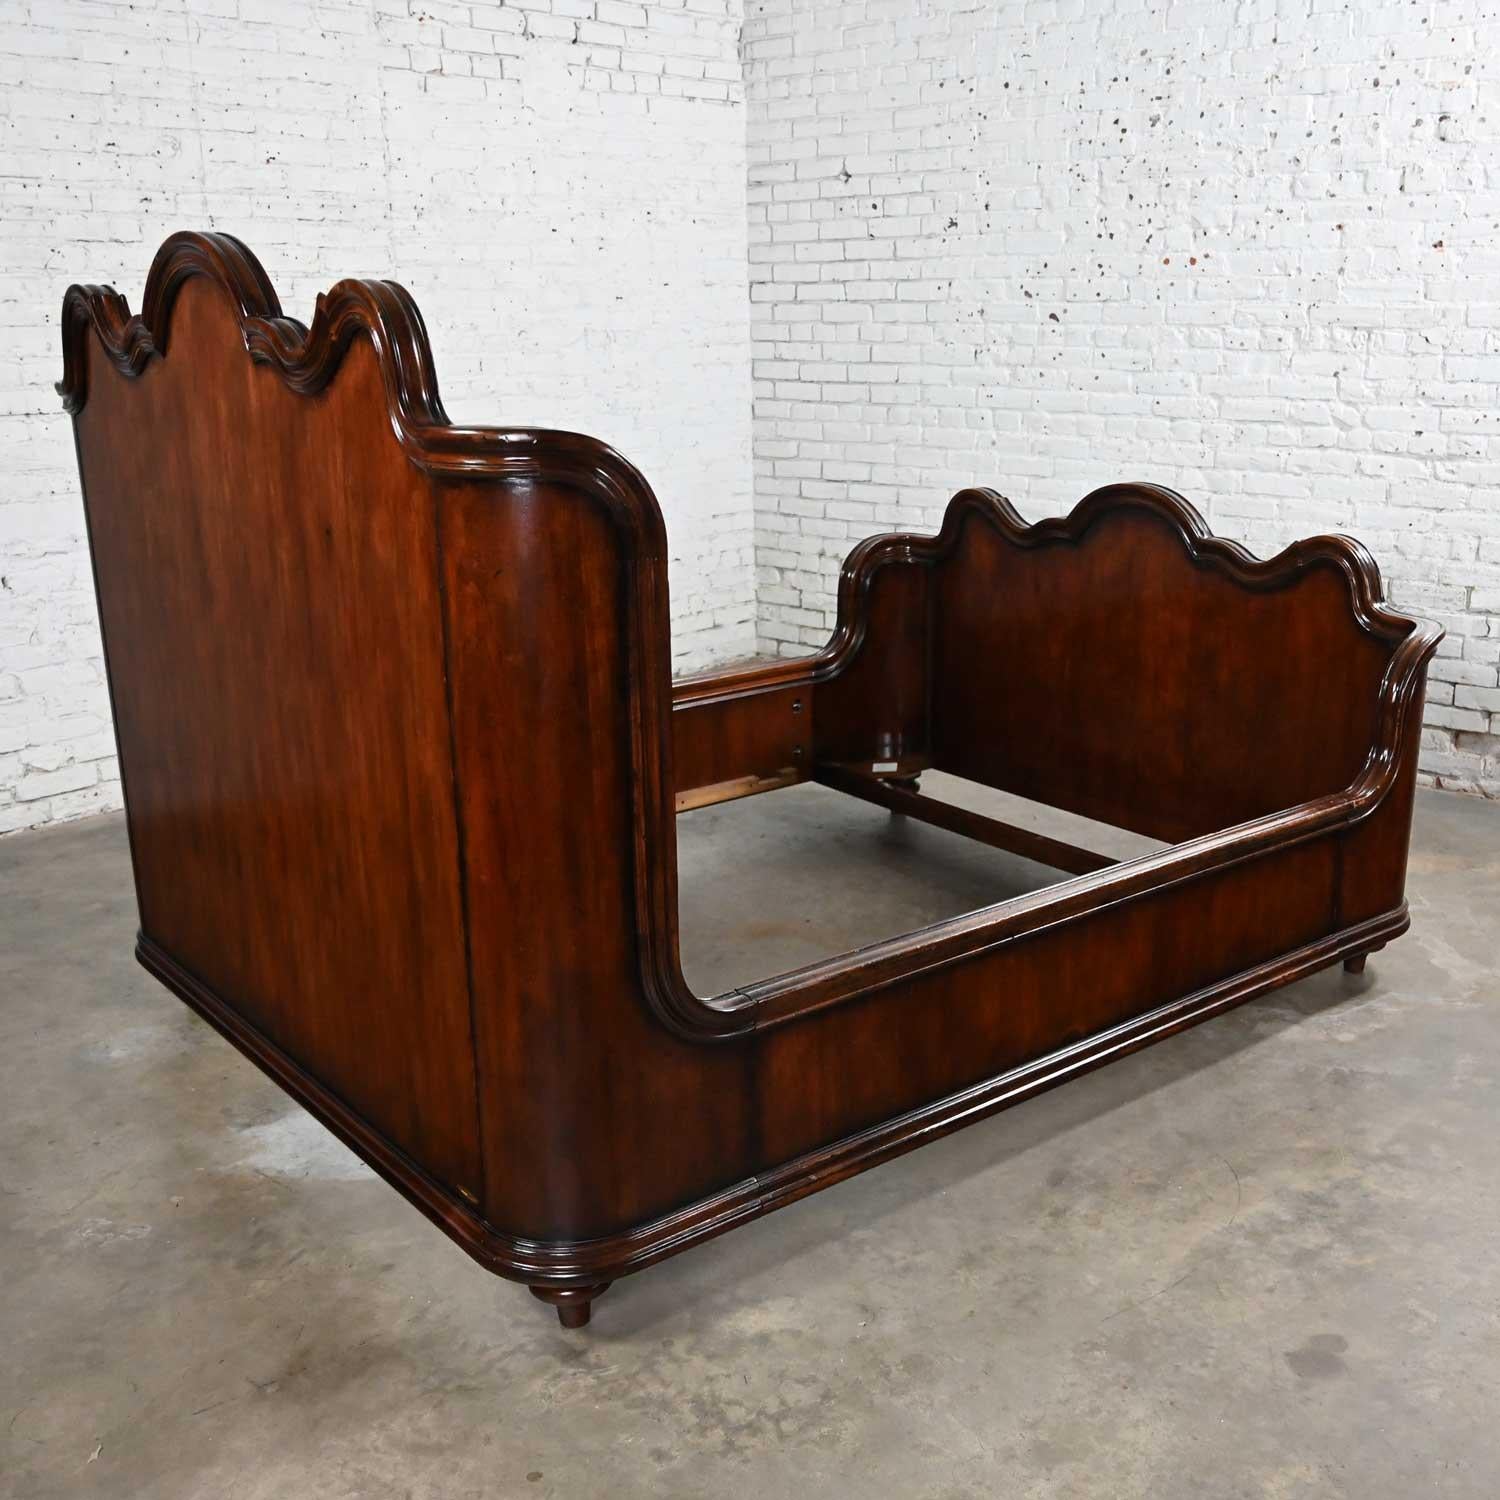 French Provincial Vintage Ralph Lauren Mahogany Scalloped Wingback Sleigh Queen Bed